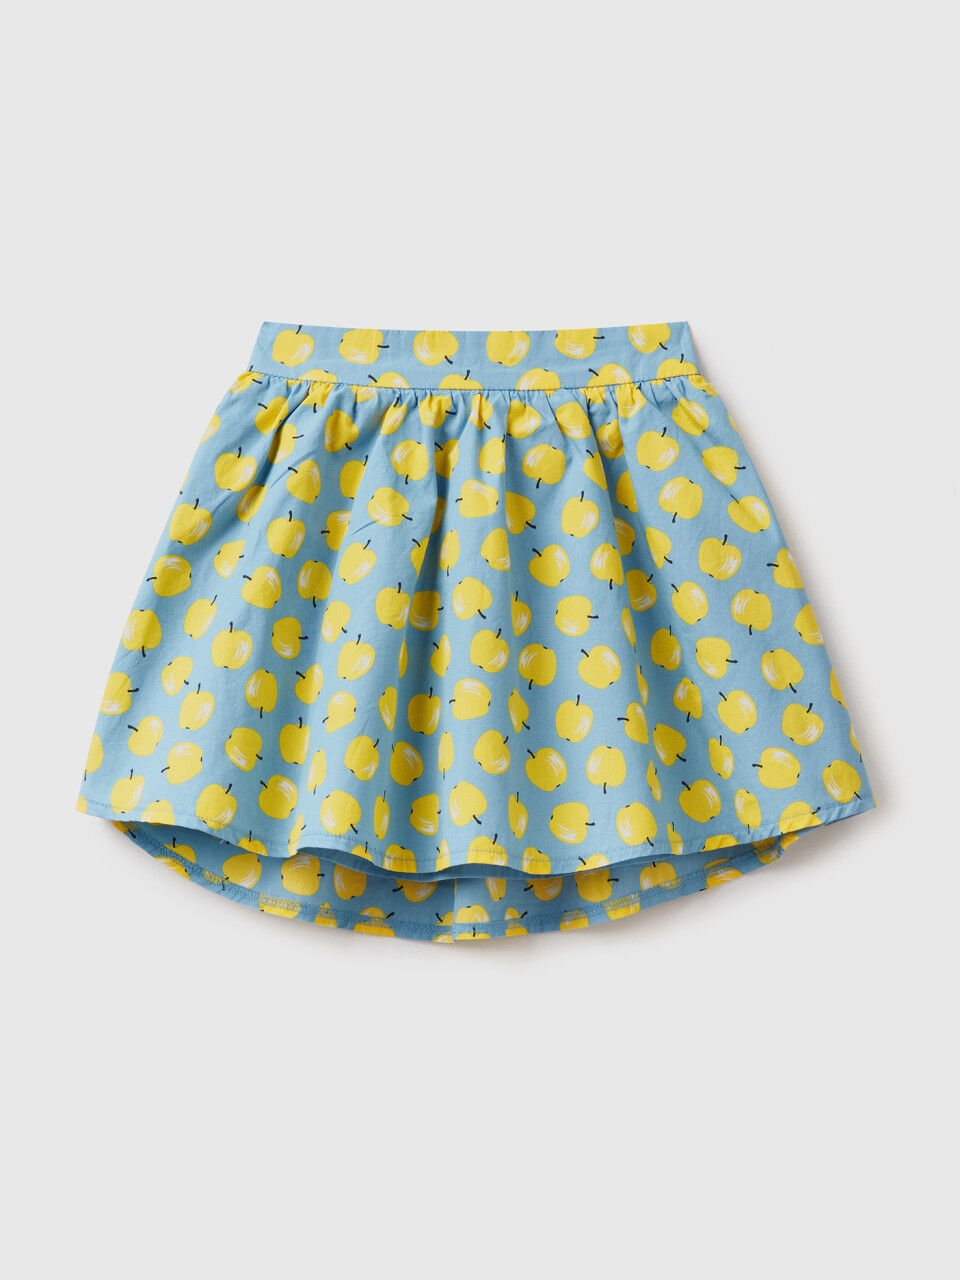 Sky blue skirt with apple pattern